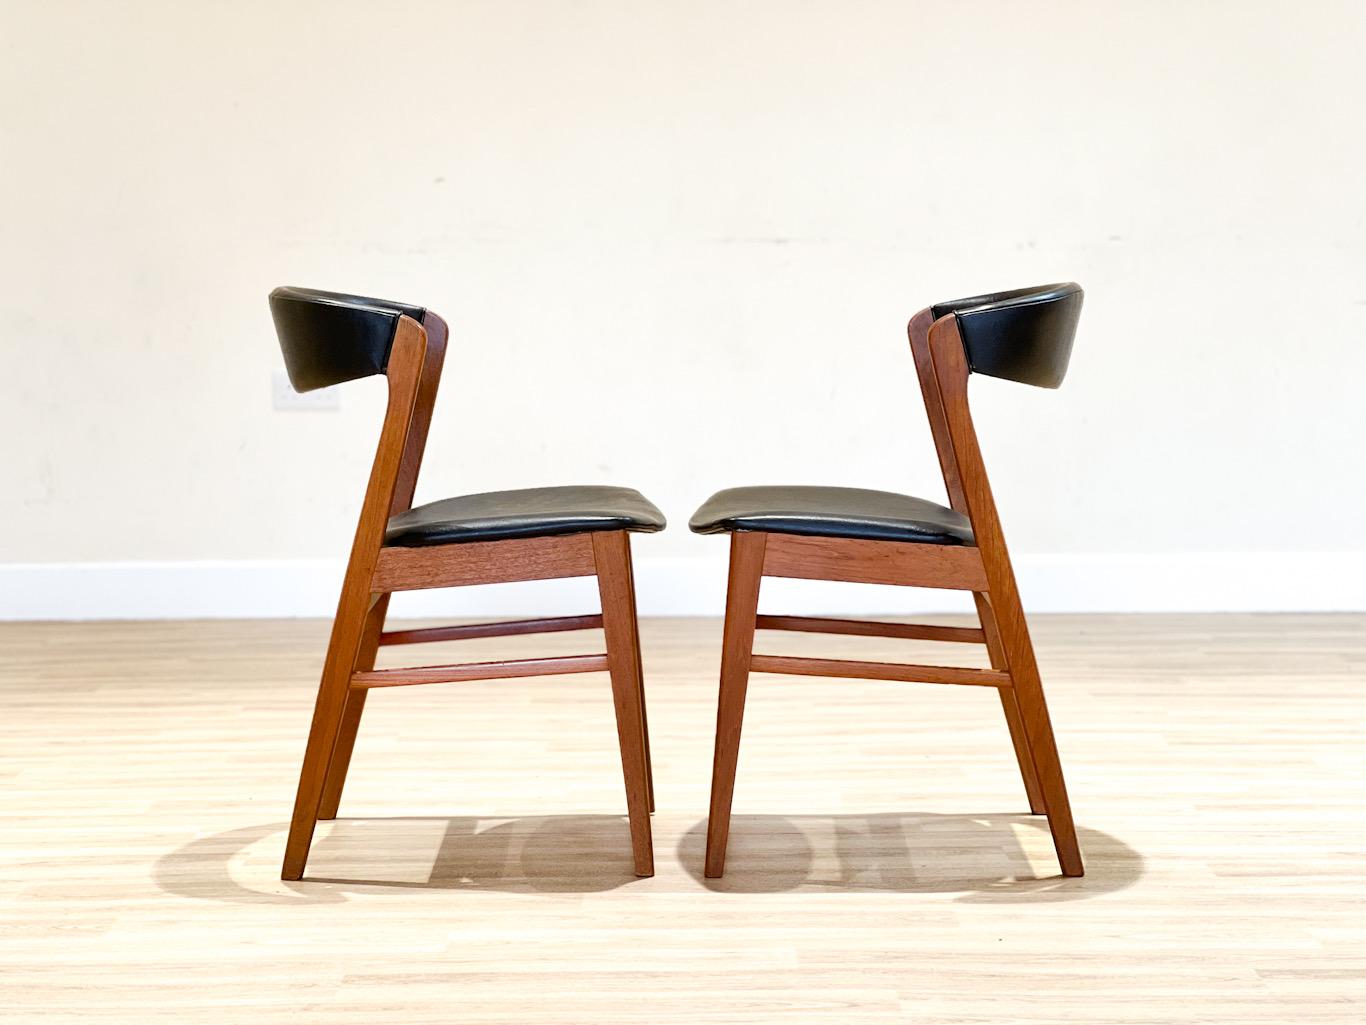 20th Century Danish Dining Chairs In Teak By Sax